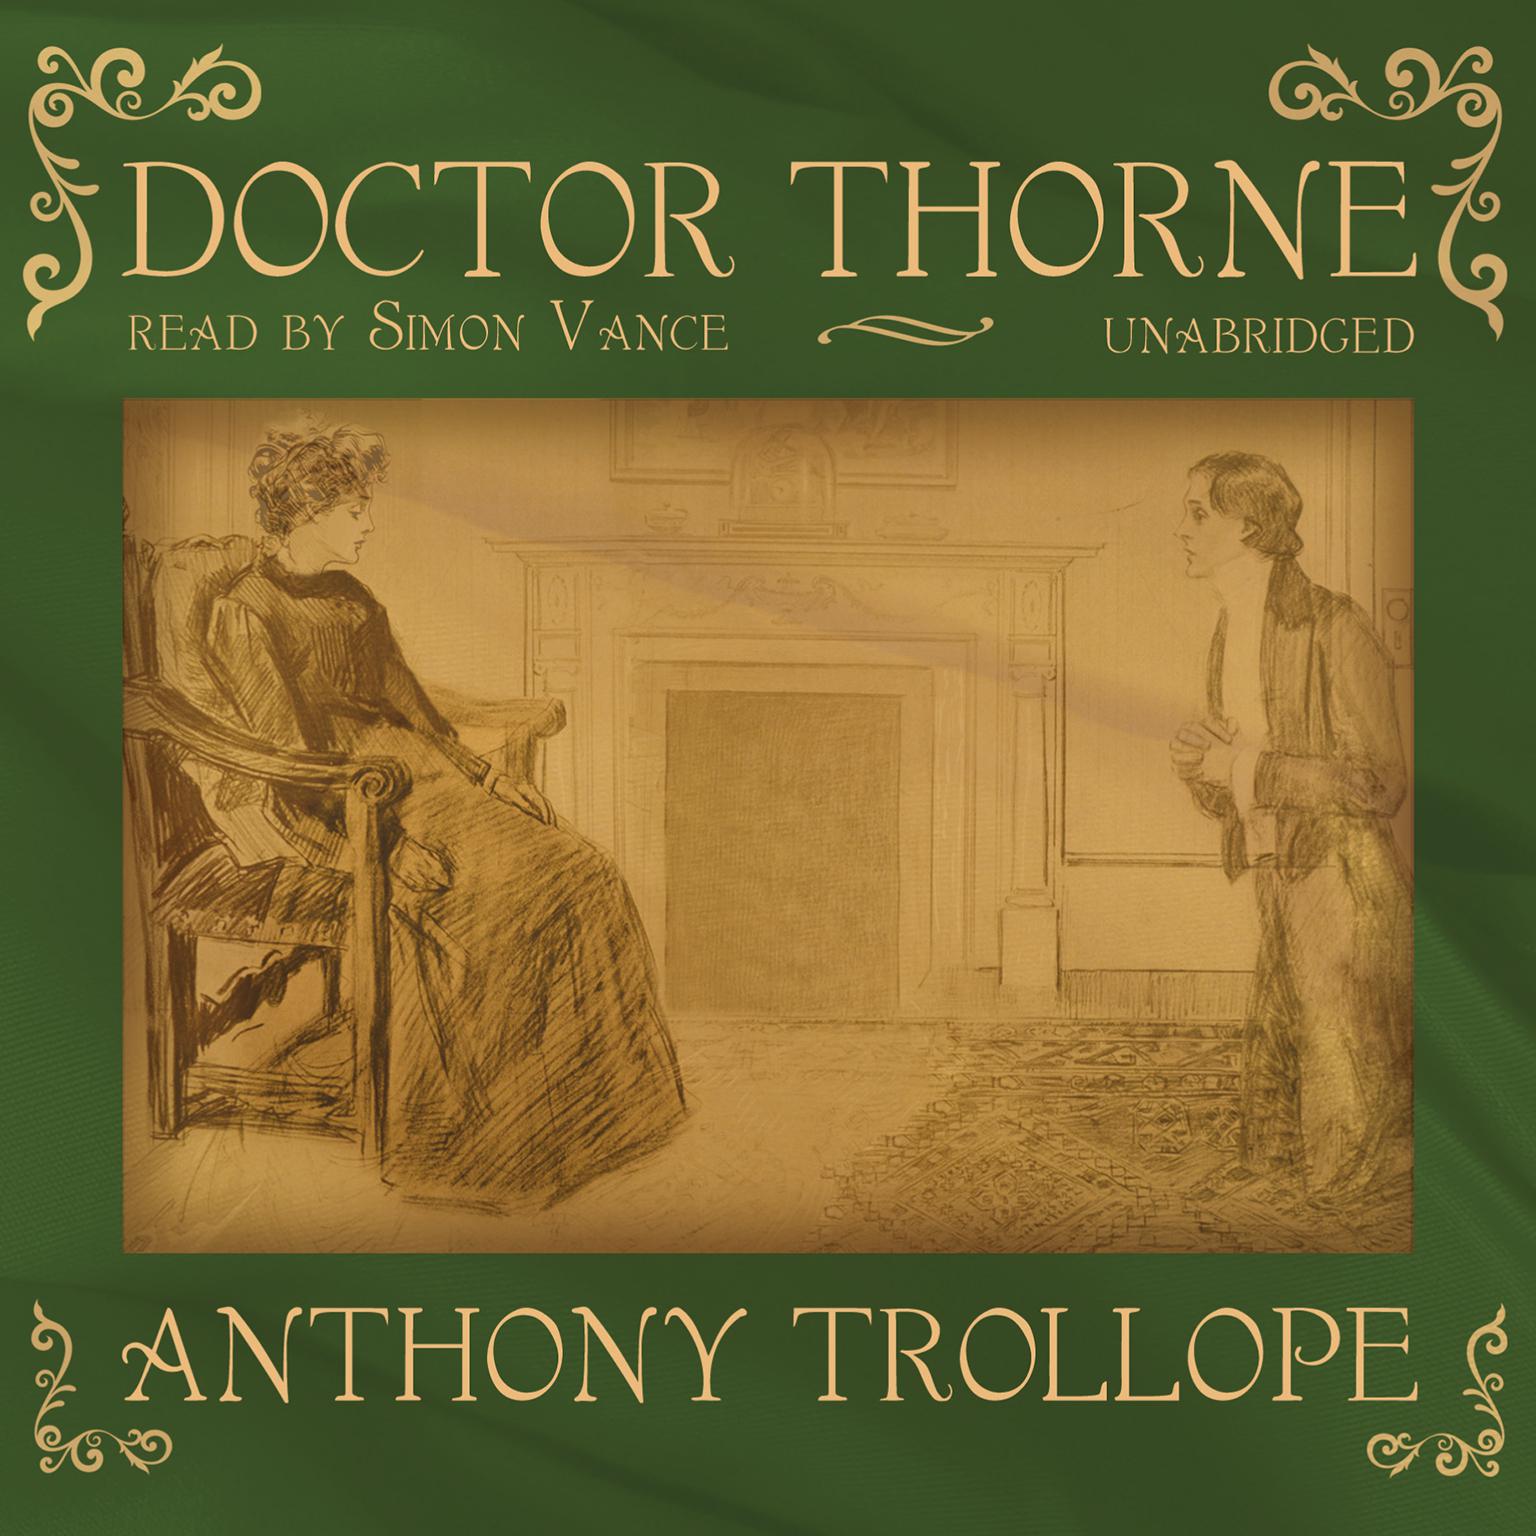 Doctor Thorne Audiobook, by Anthony Trollope